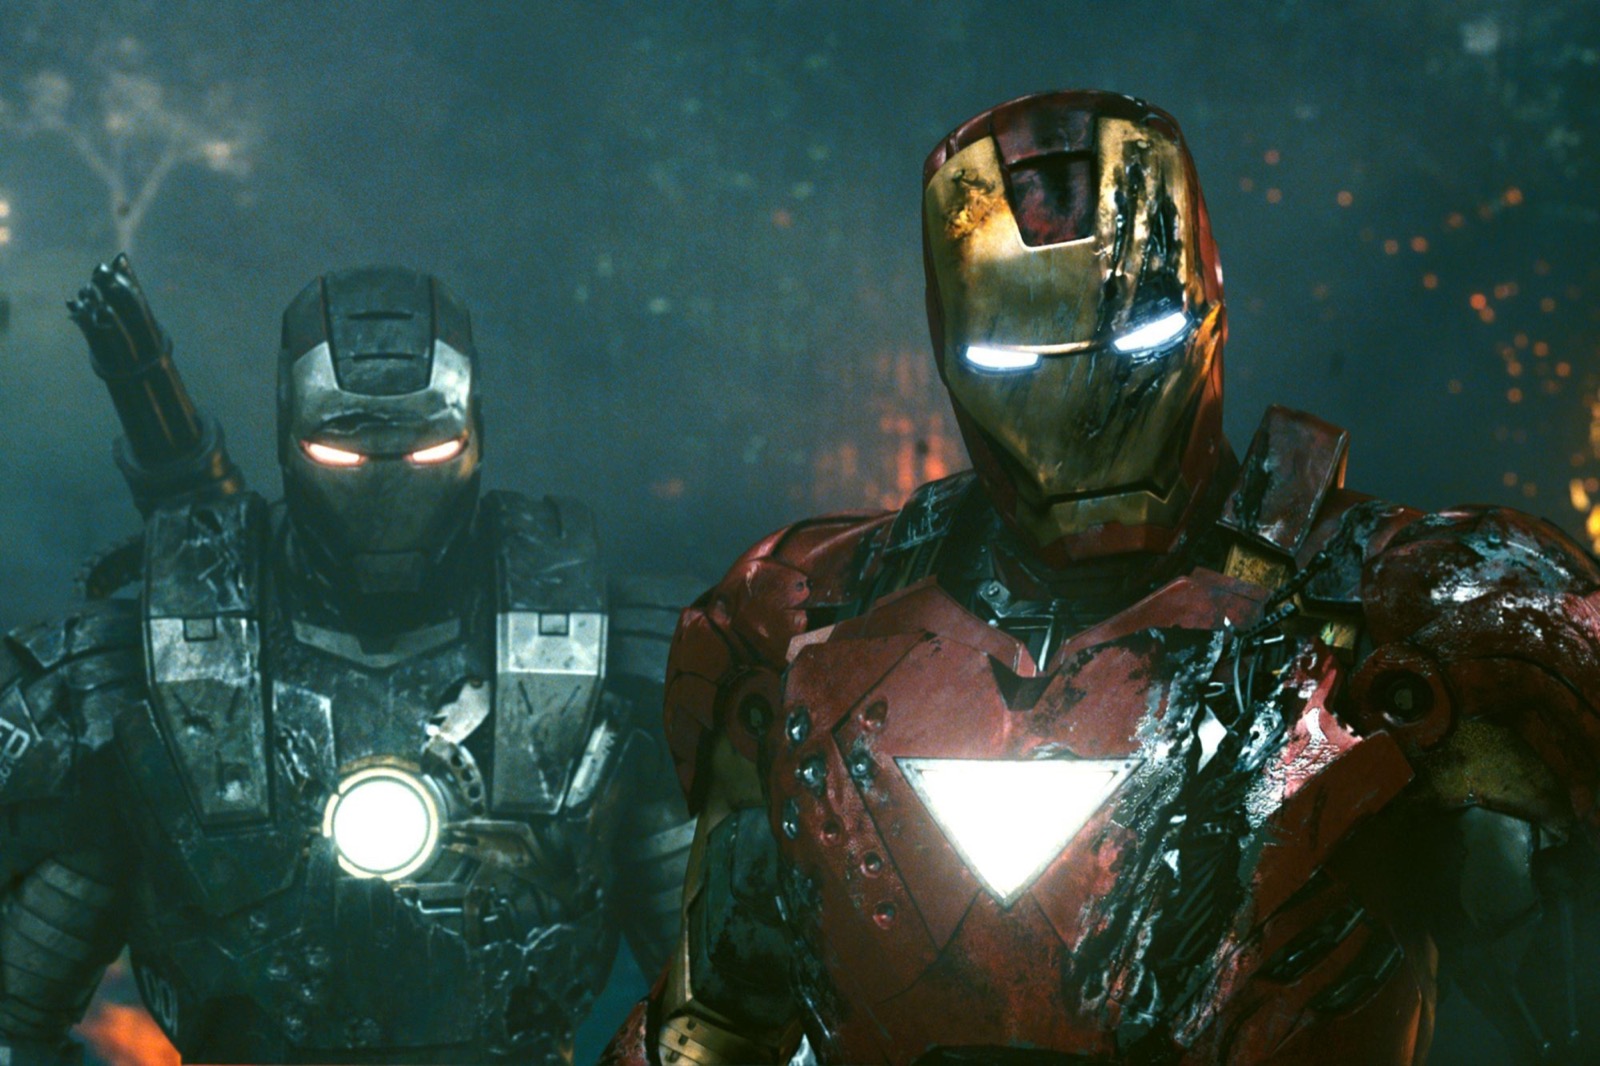 Which Original Avenger Are You? Iron Man 2 (2010)